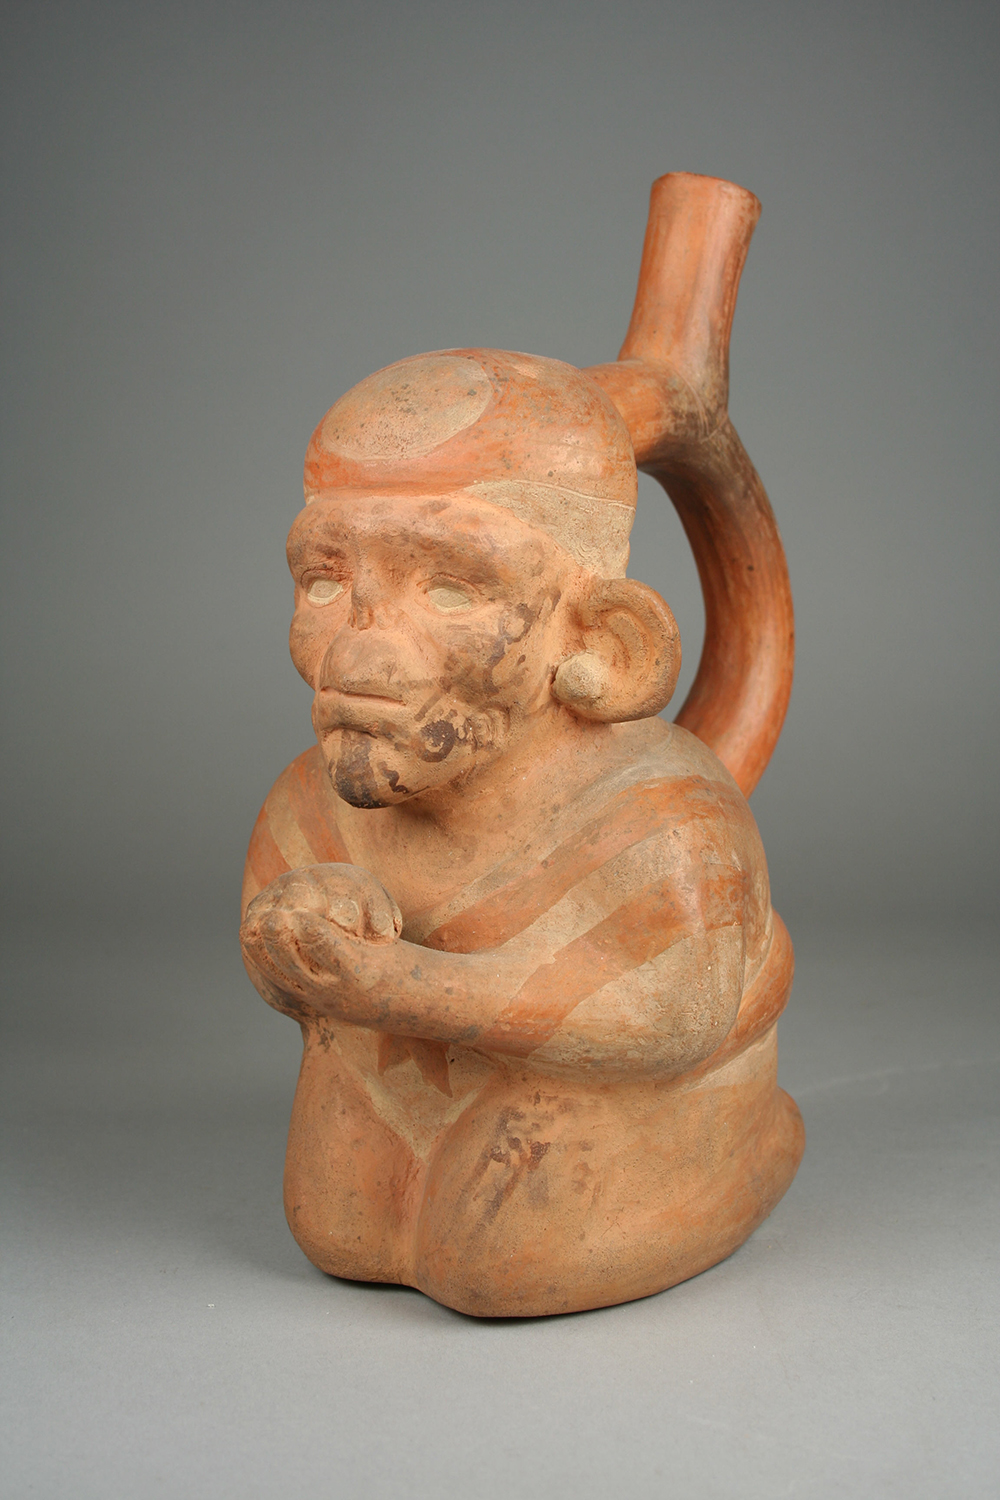 Moche stirrup spout bottle in the form of a kneeling leper, Peru, third to fifth century